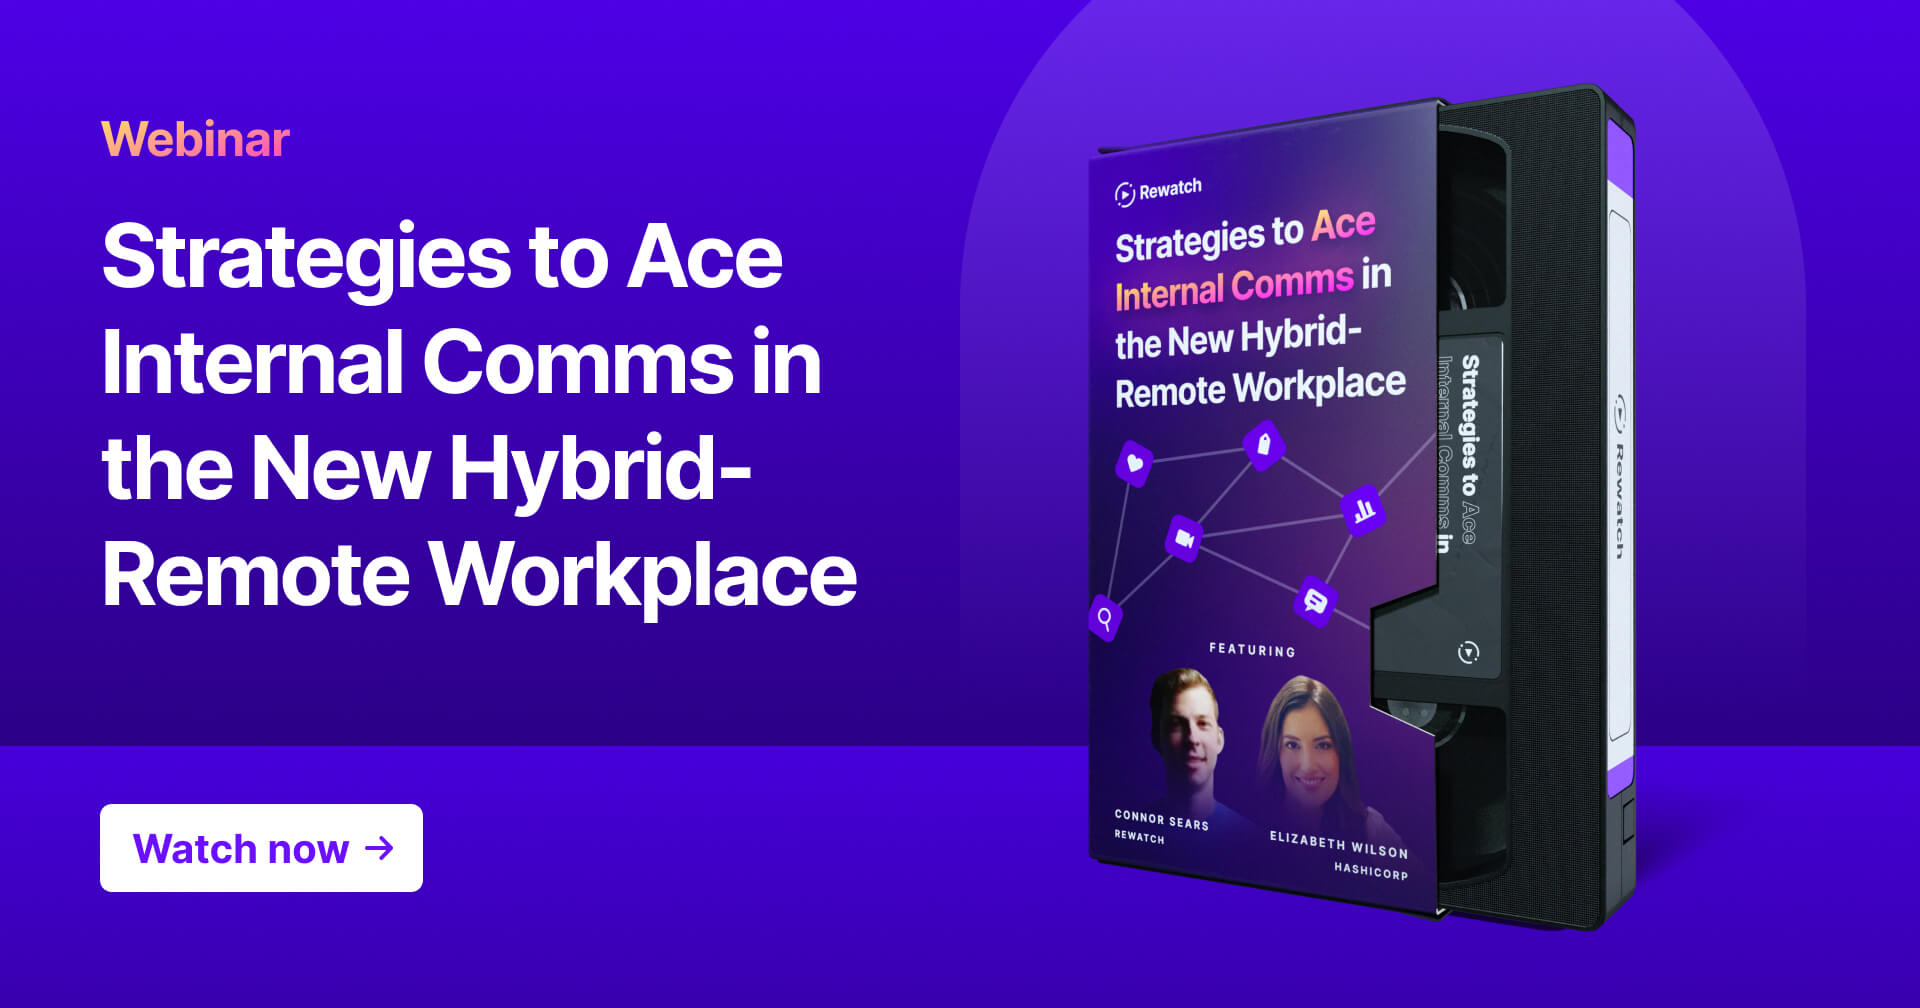 On-demand webinar: Strategies to Ace Internal Comms in the Hybrid-Remote Workplace